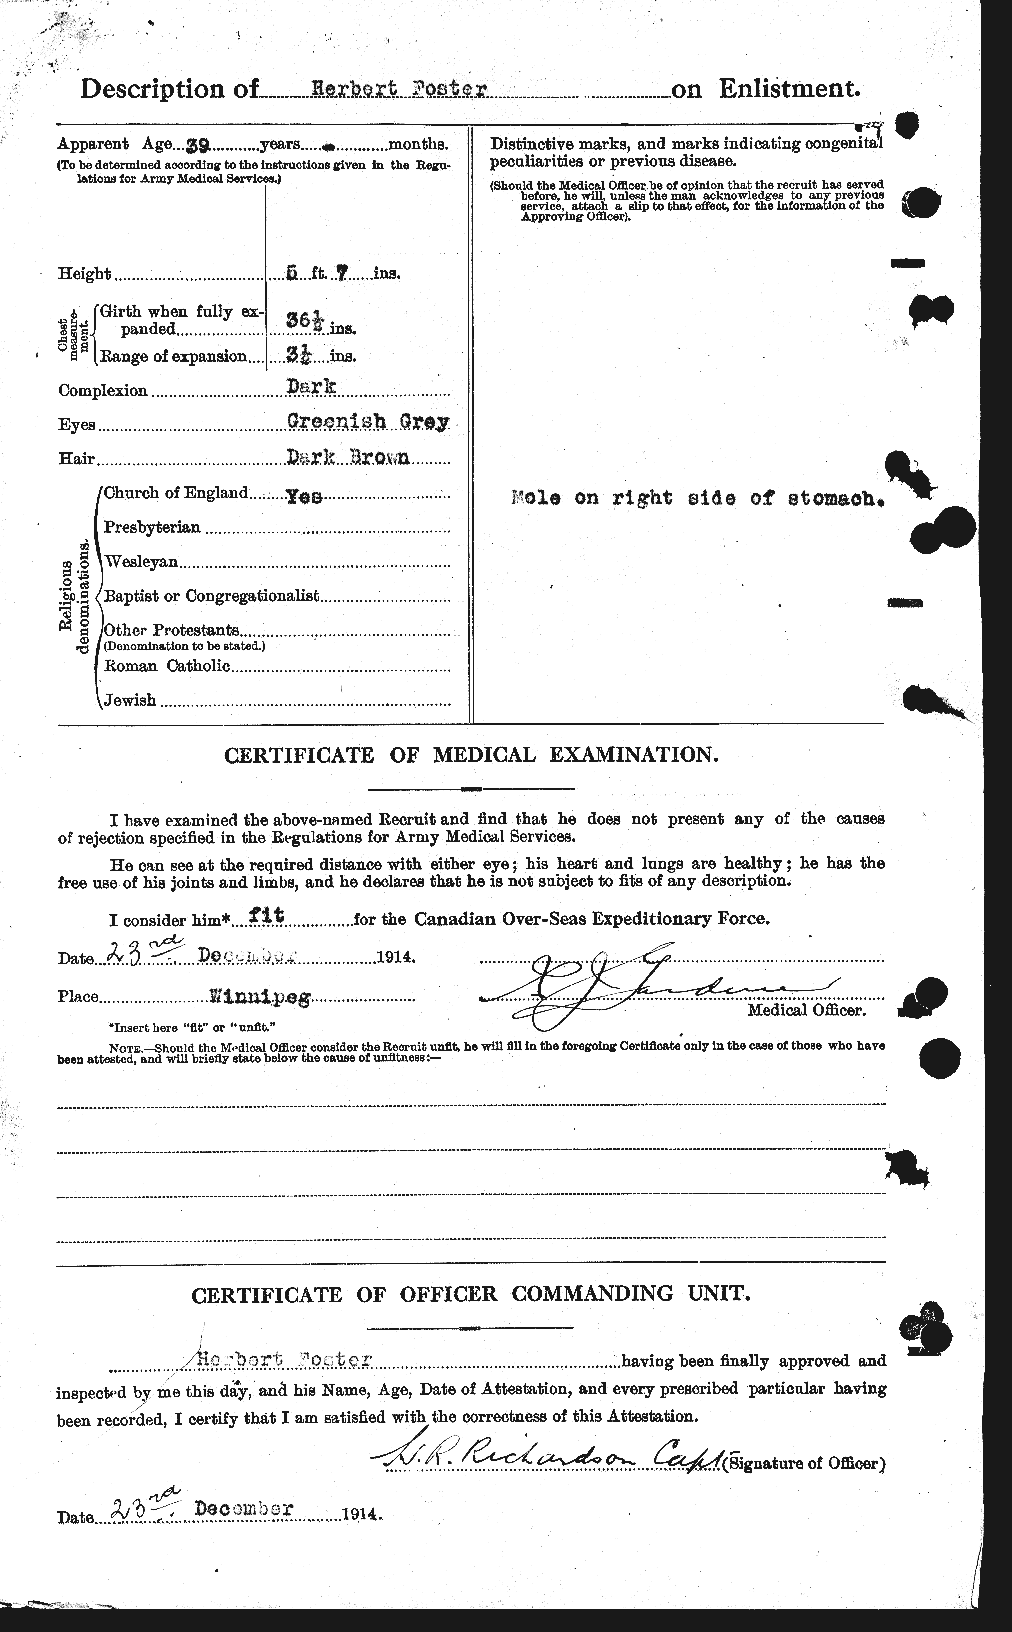 Personnel Records of the First World War - CEF 333255b